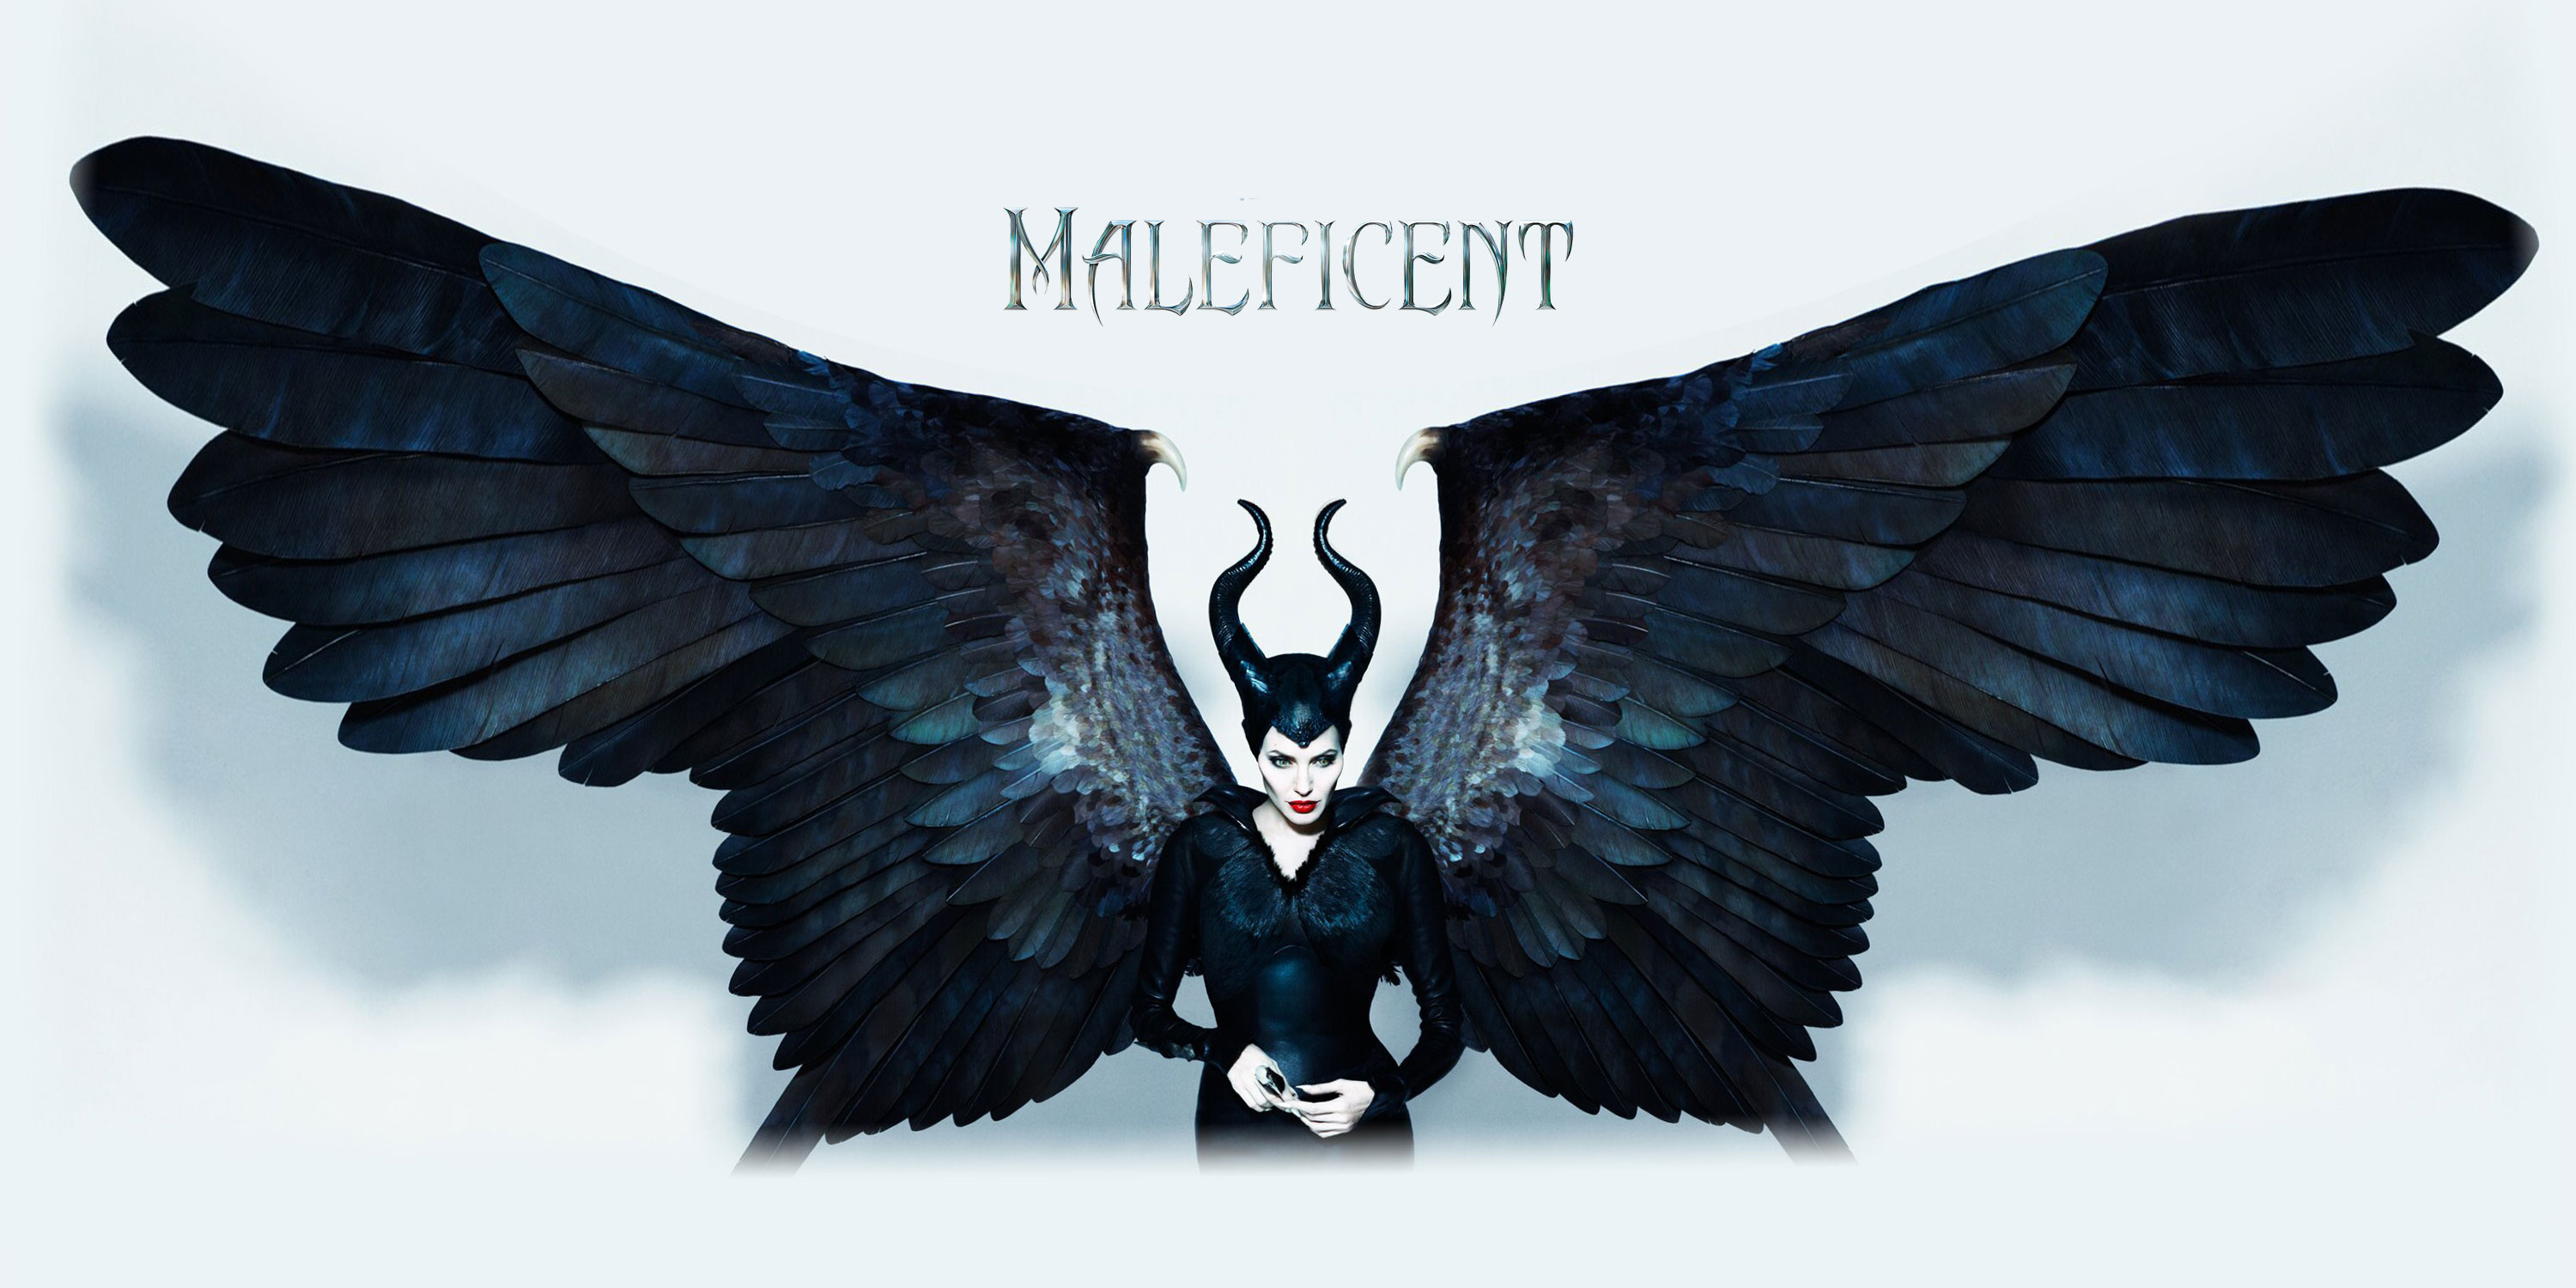 Maleficent, Movie wallpapers for iPad and iPhone, 3000x1500 Dual Screen Desktop